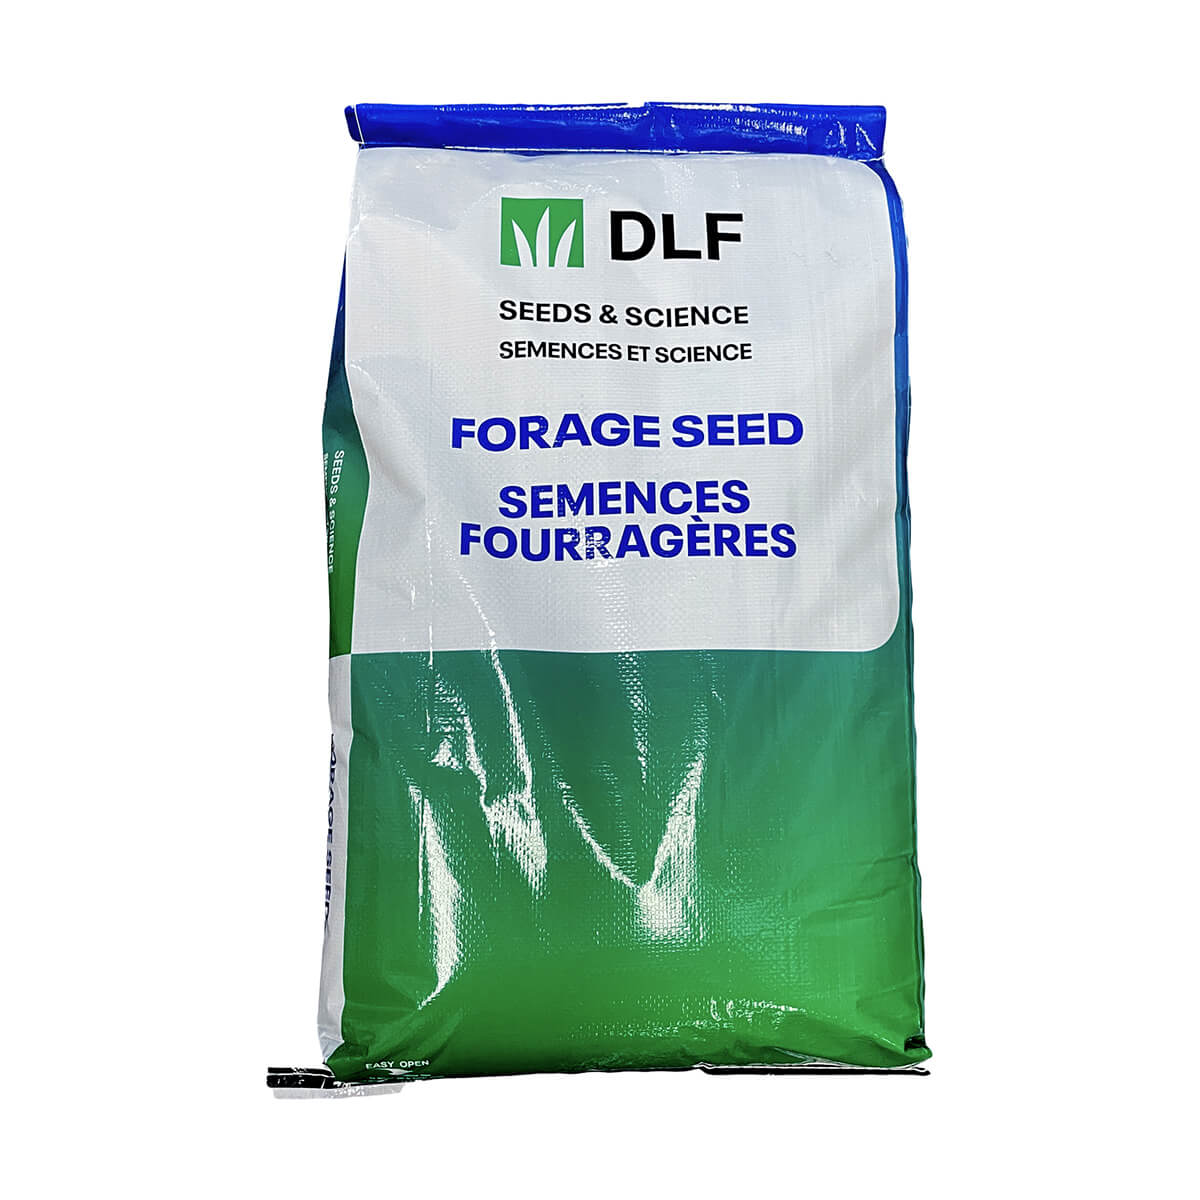 Winfred Forage Rapeseed - 22.68 kg